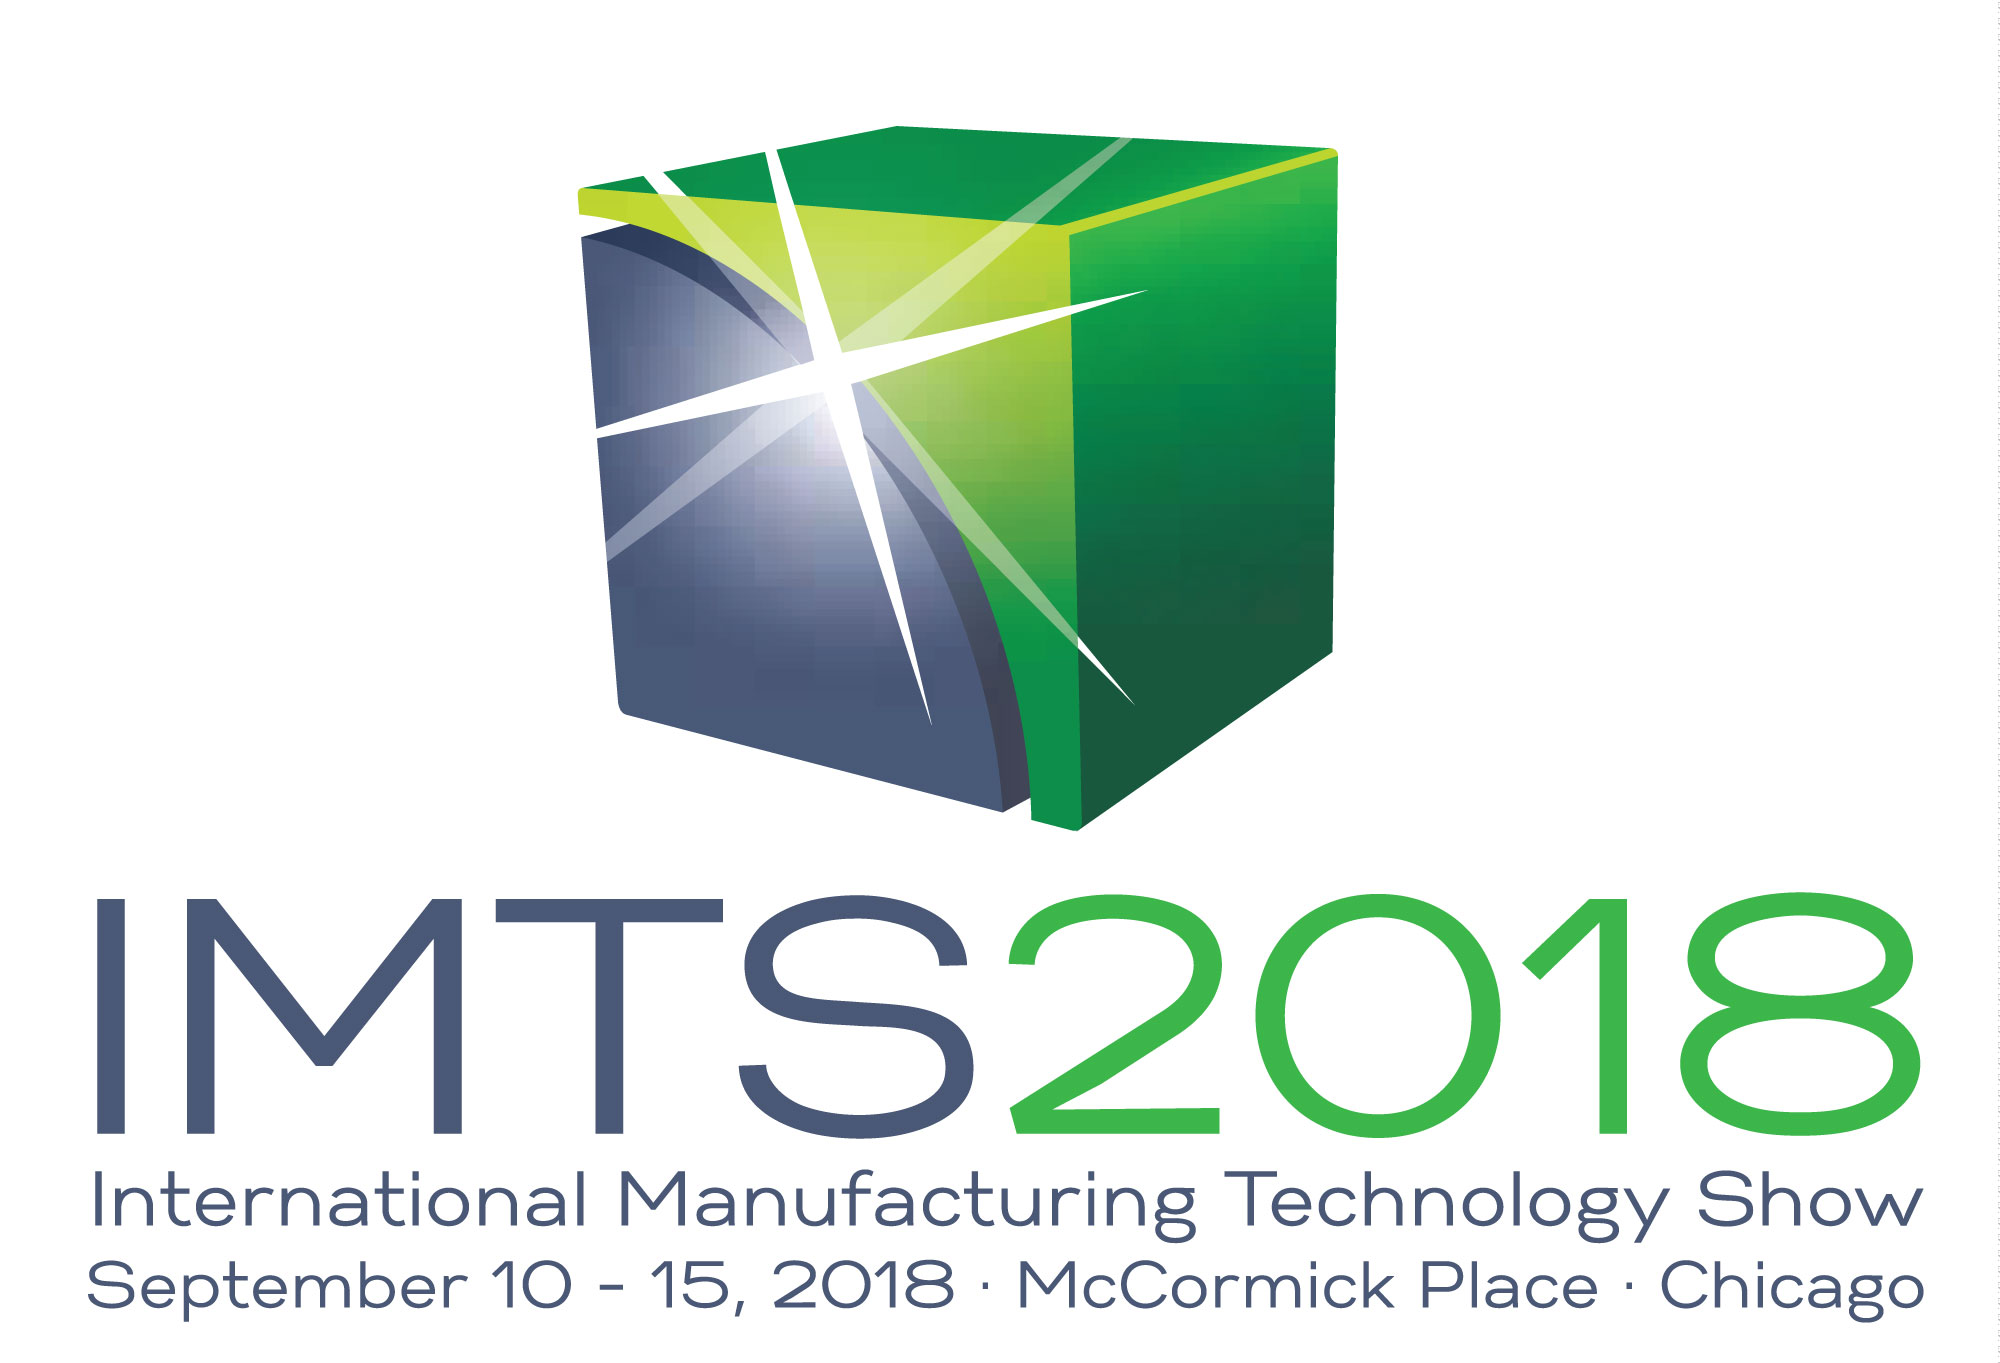 IMTS 2018, September 10 -15, 2018, McCormick Place, Chicago